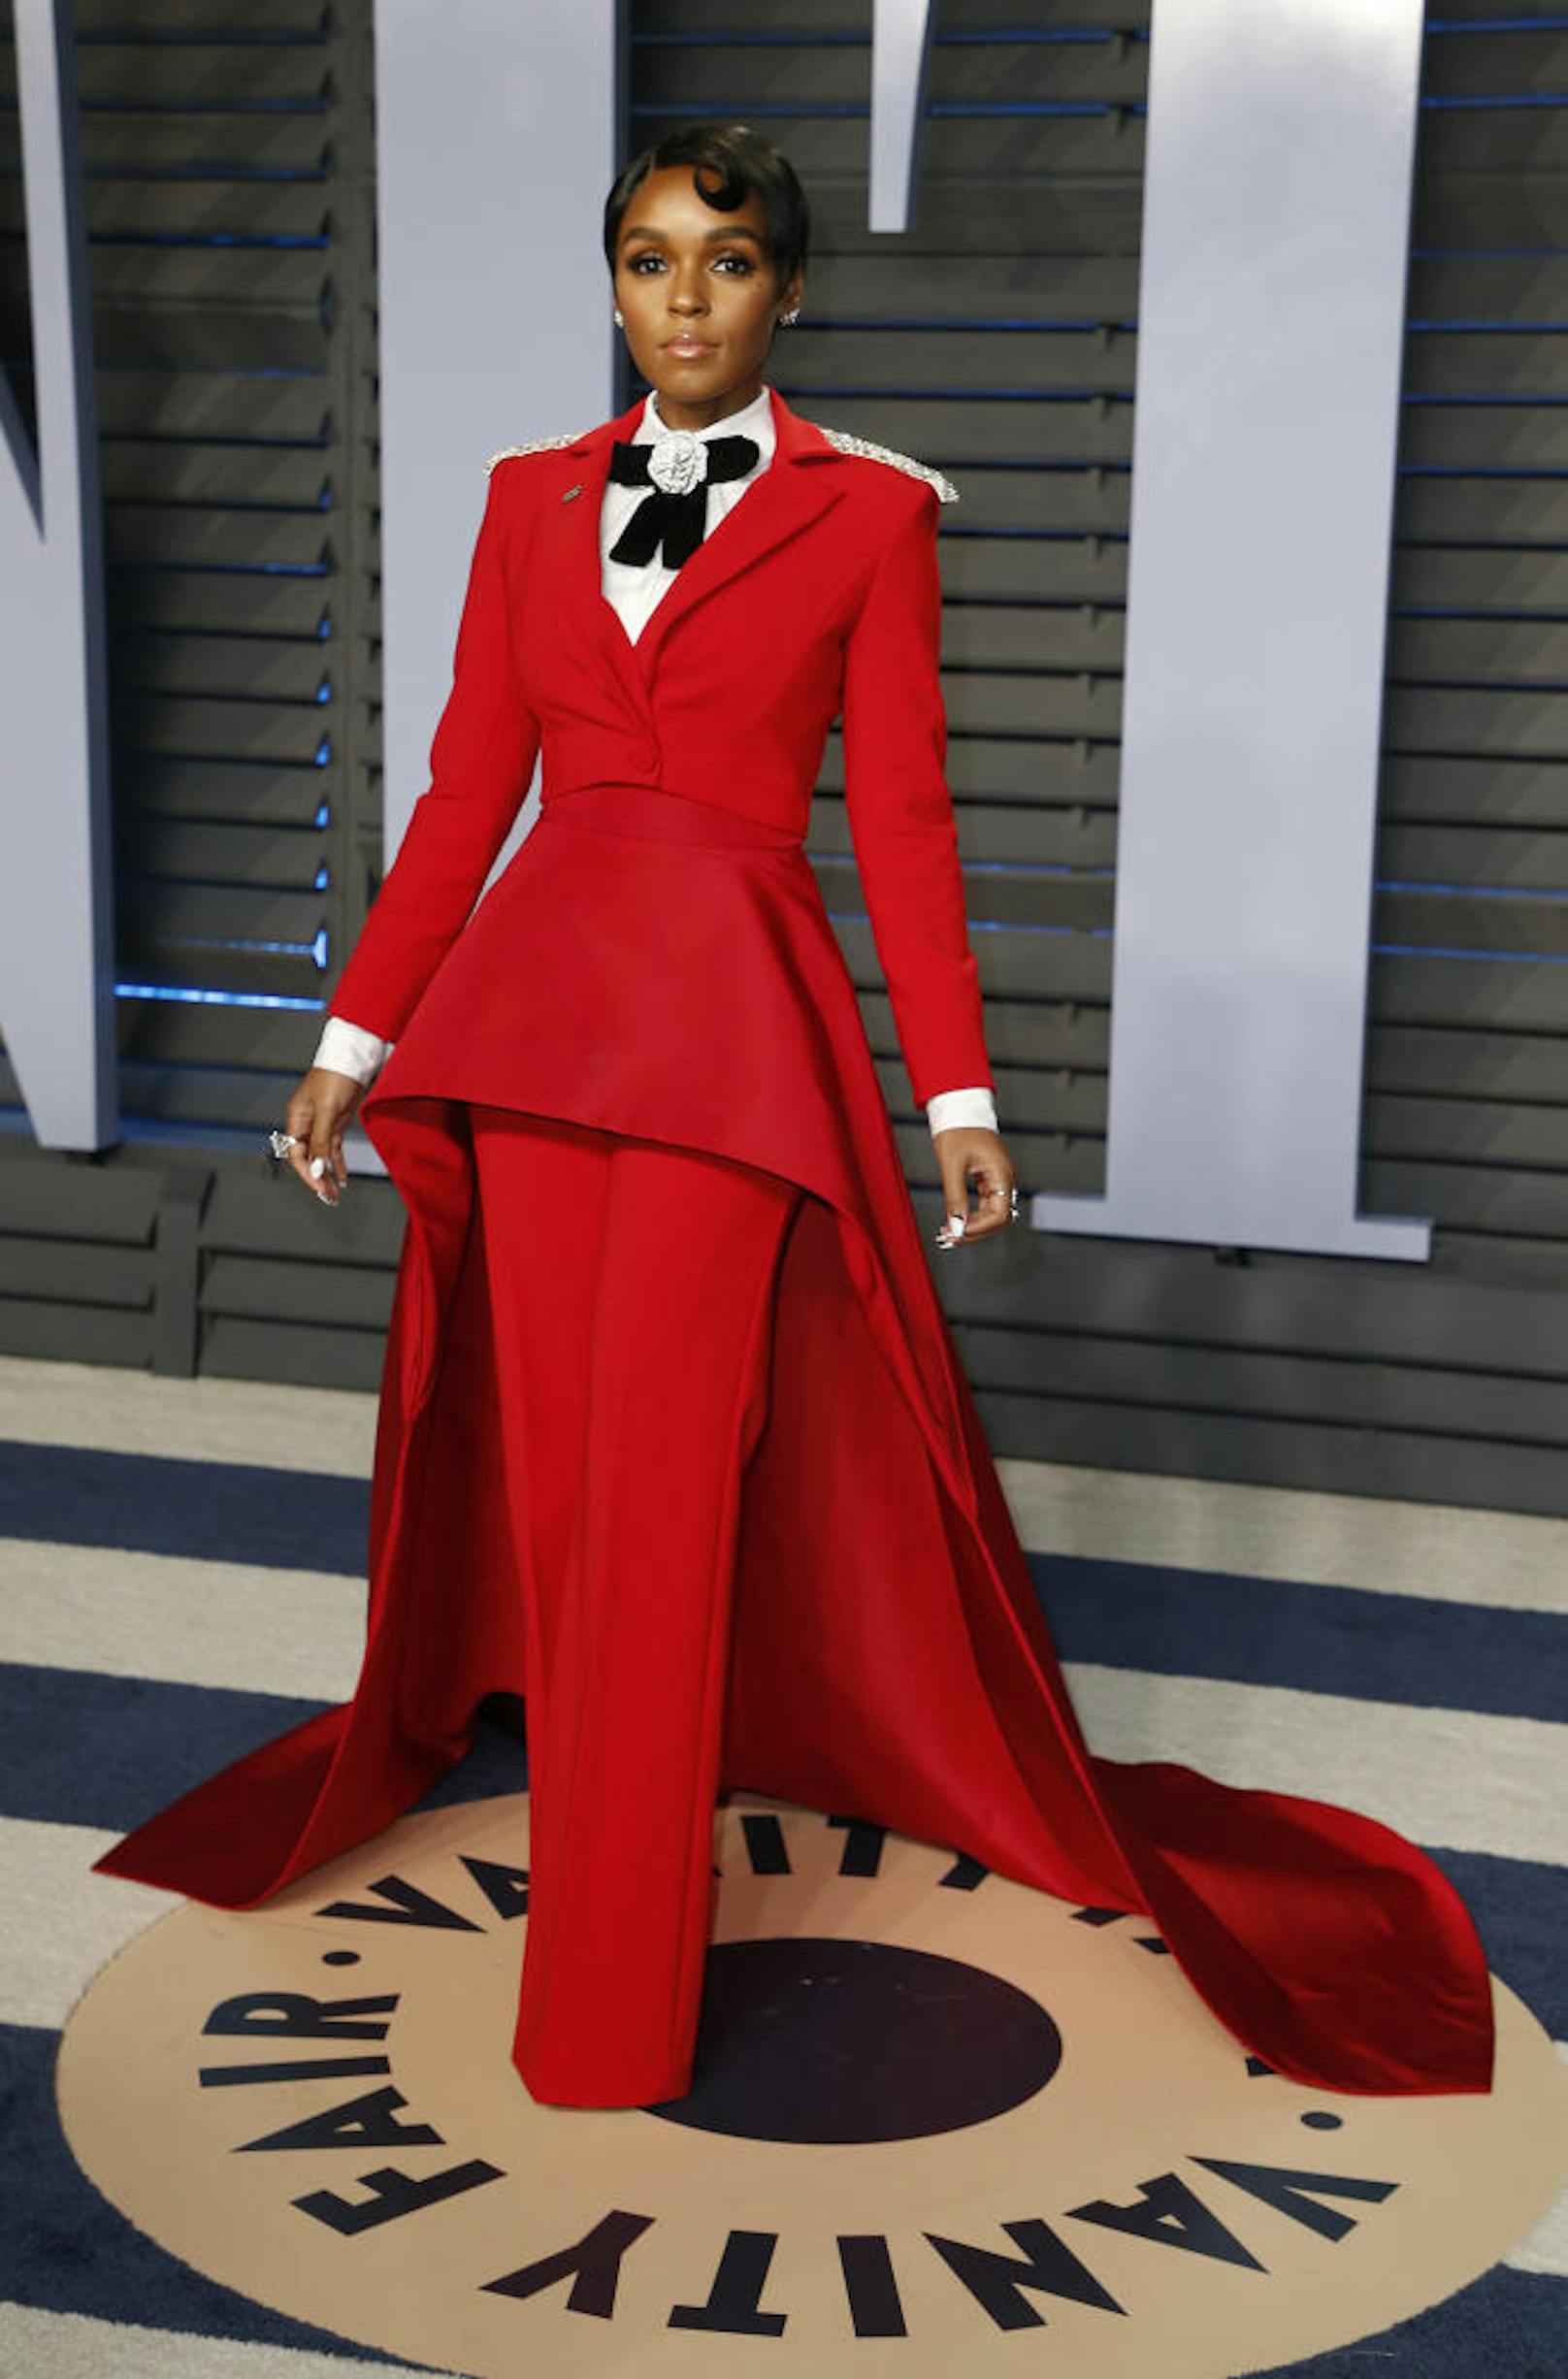 Janelle Monáe in Christian Siriano